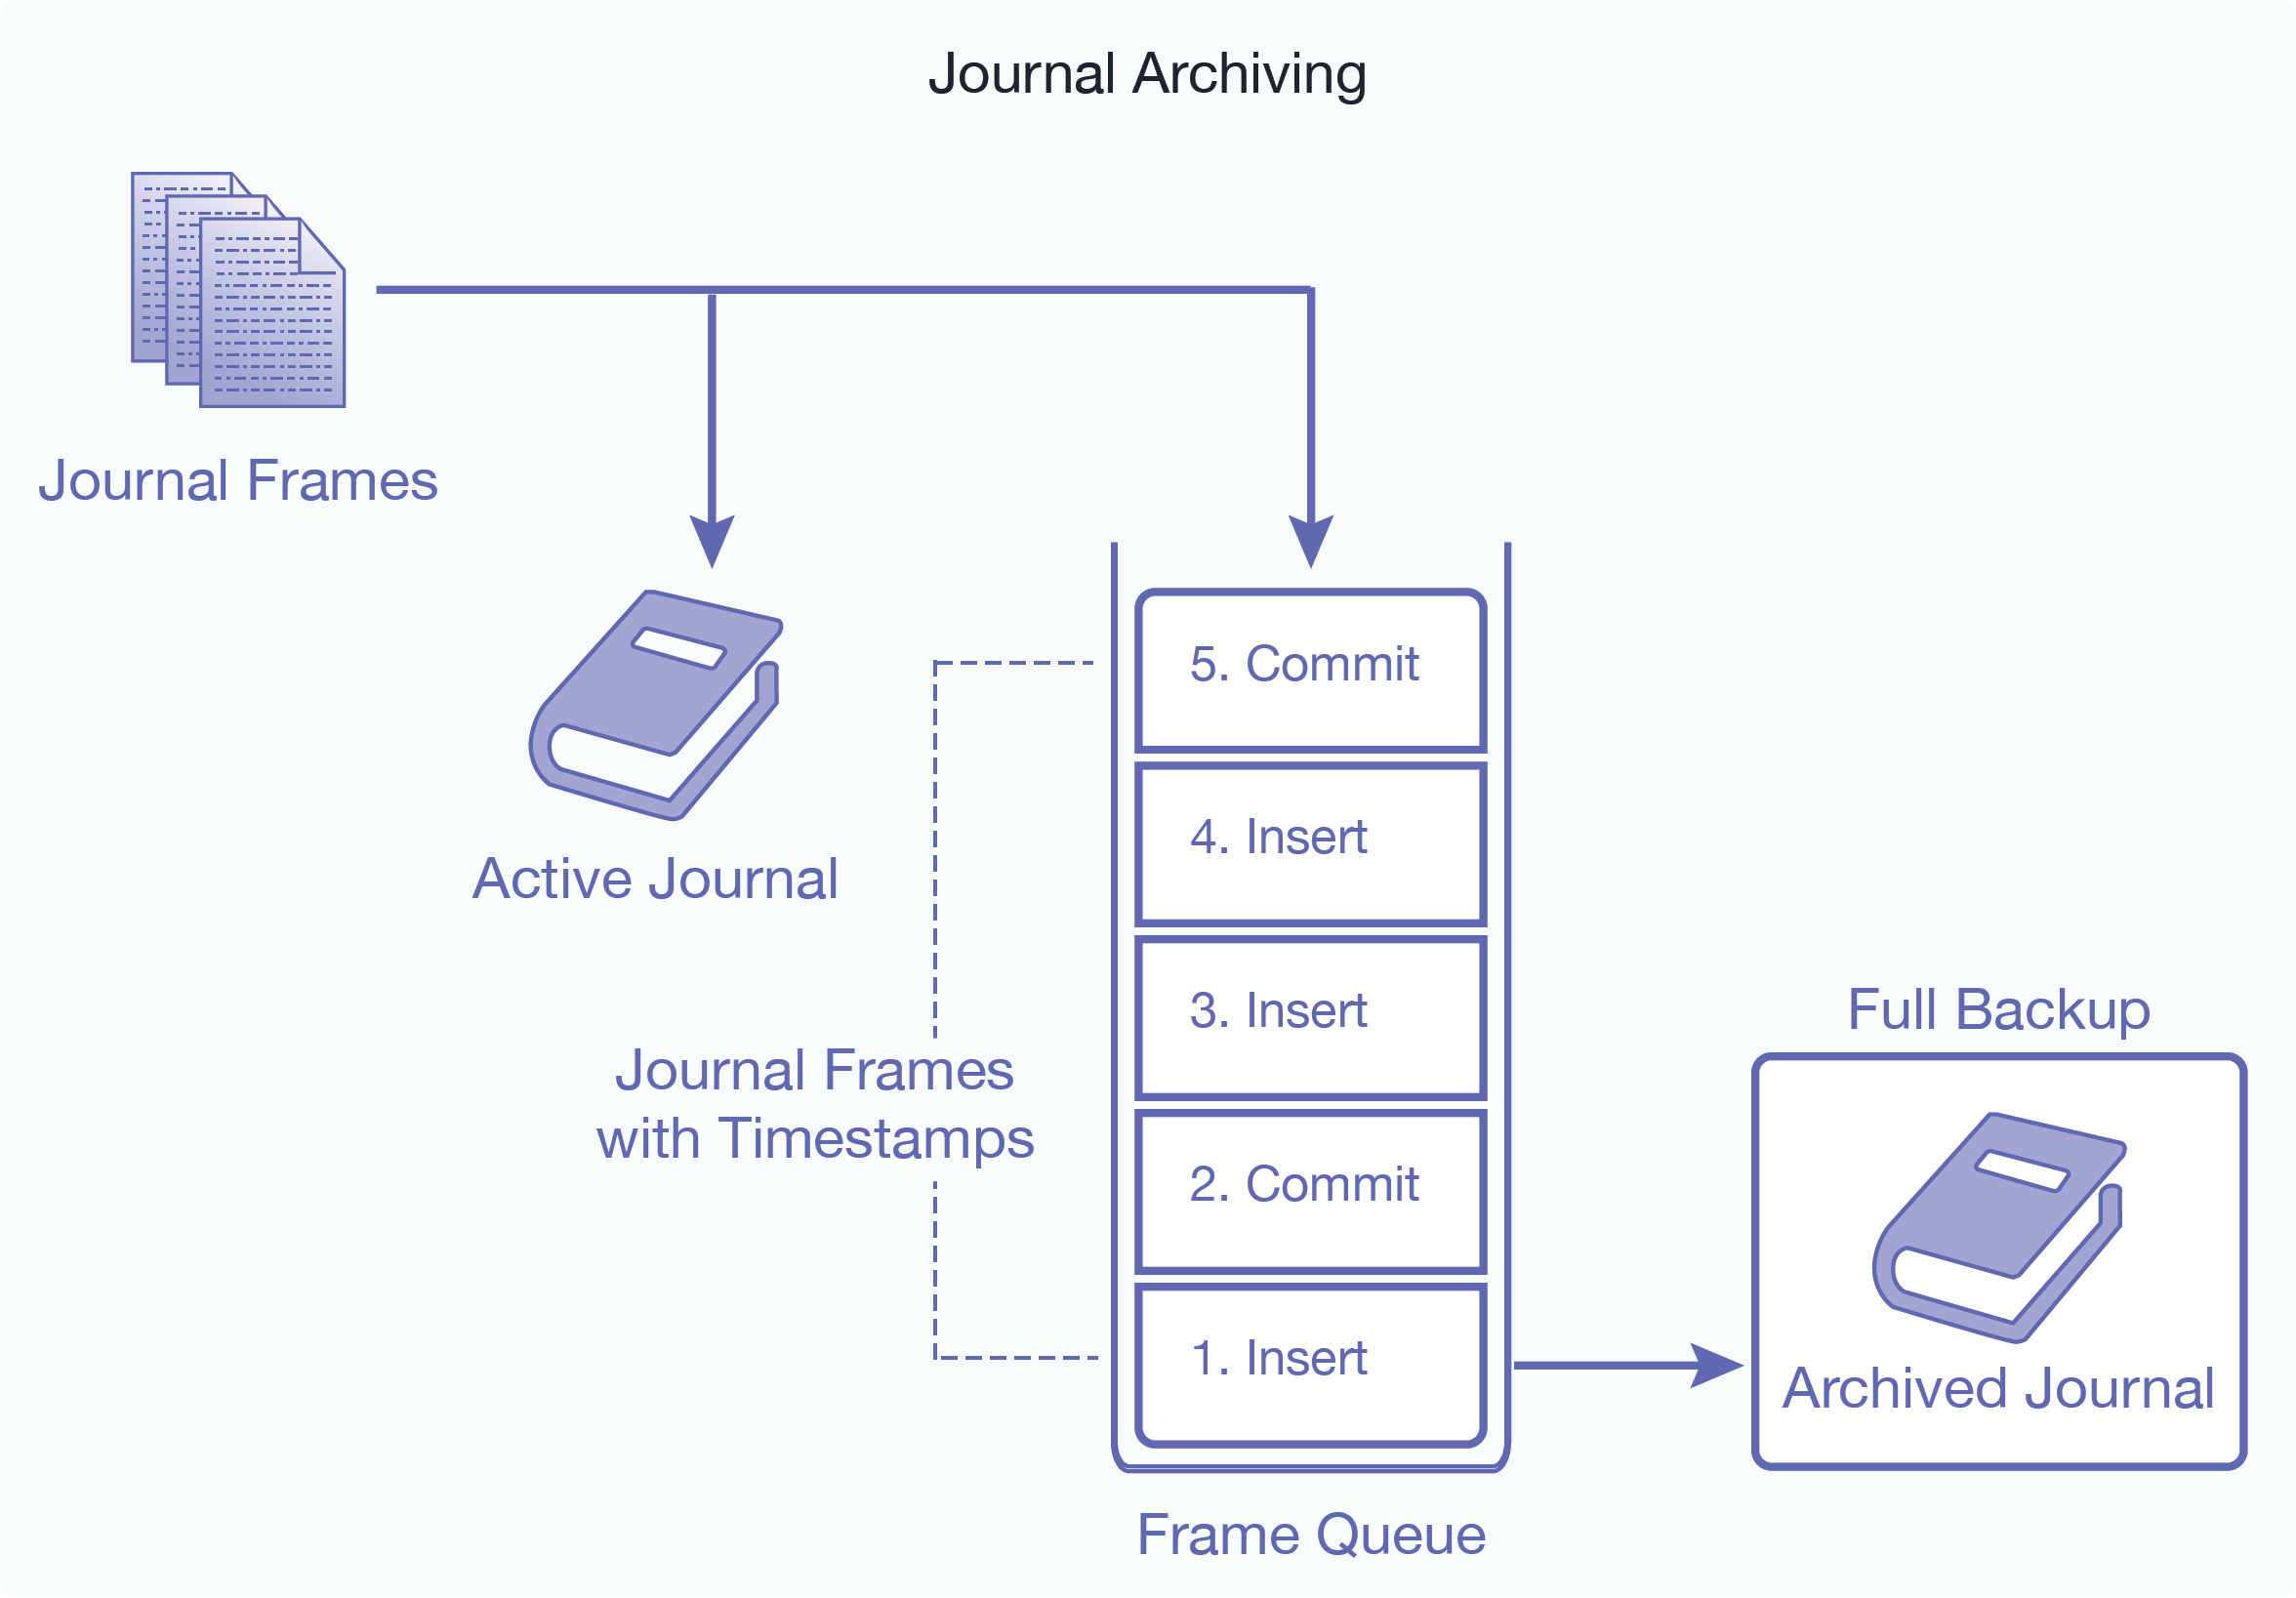 Diagram showing journal archiving